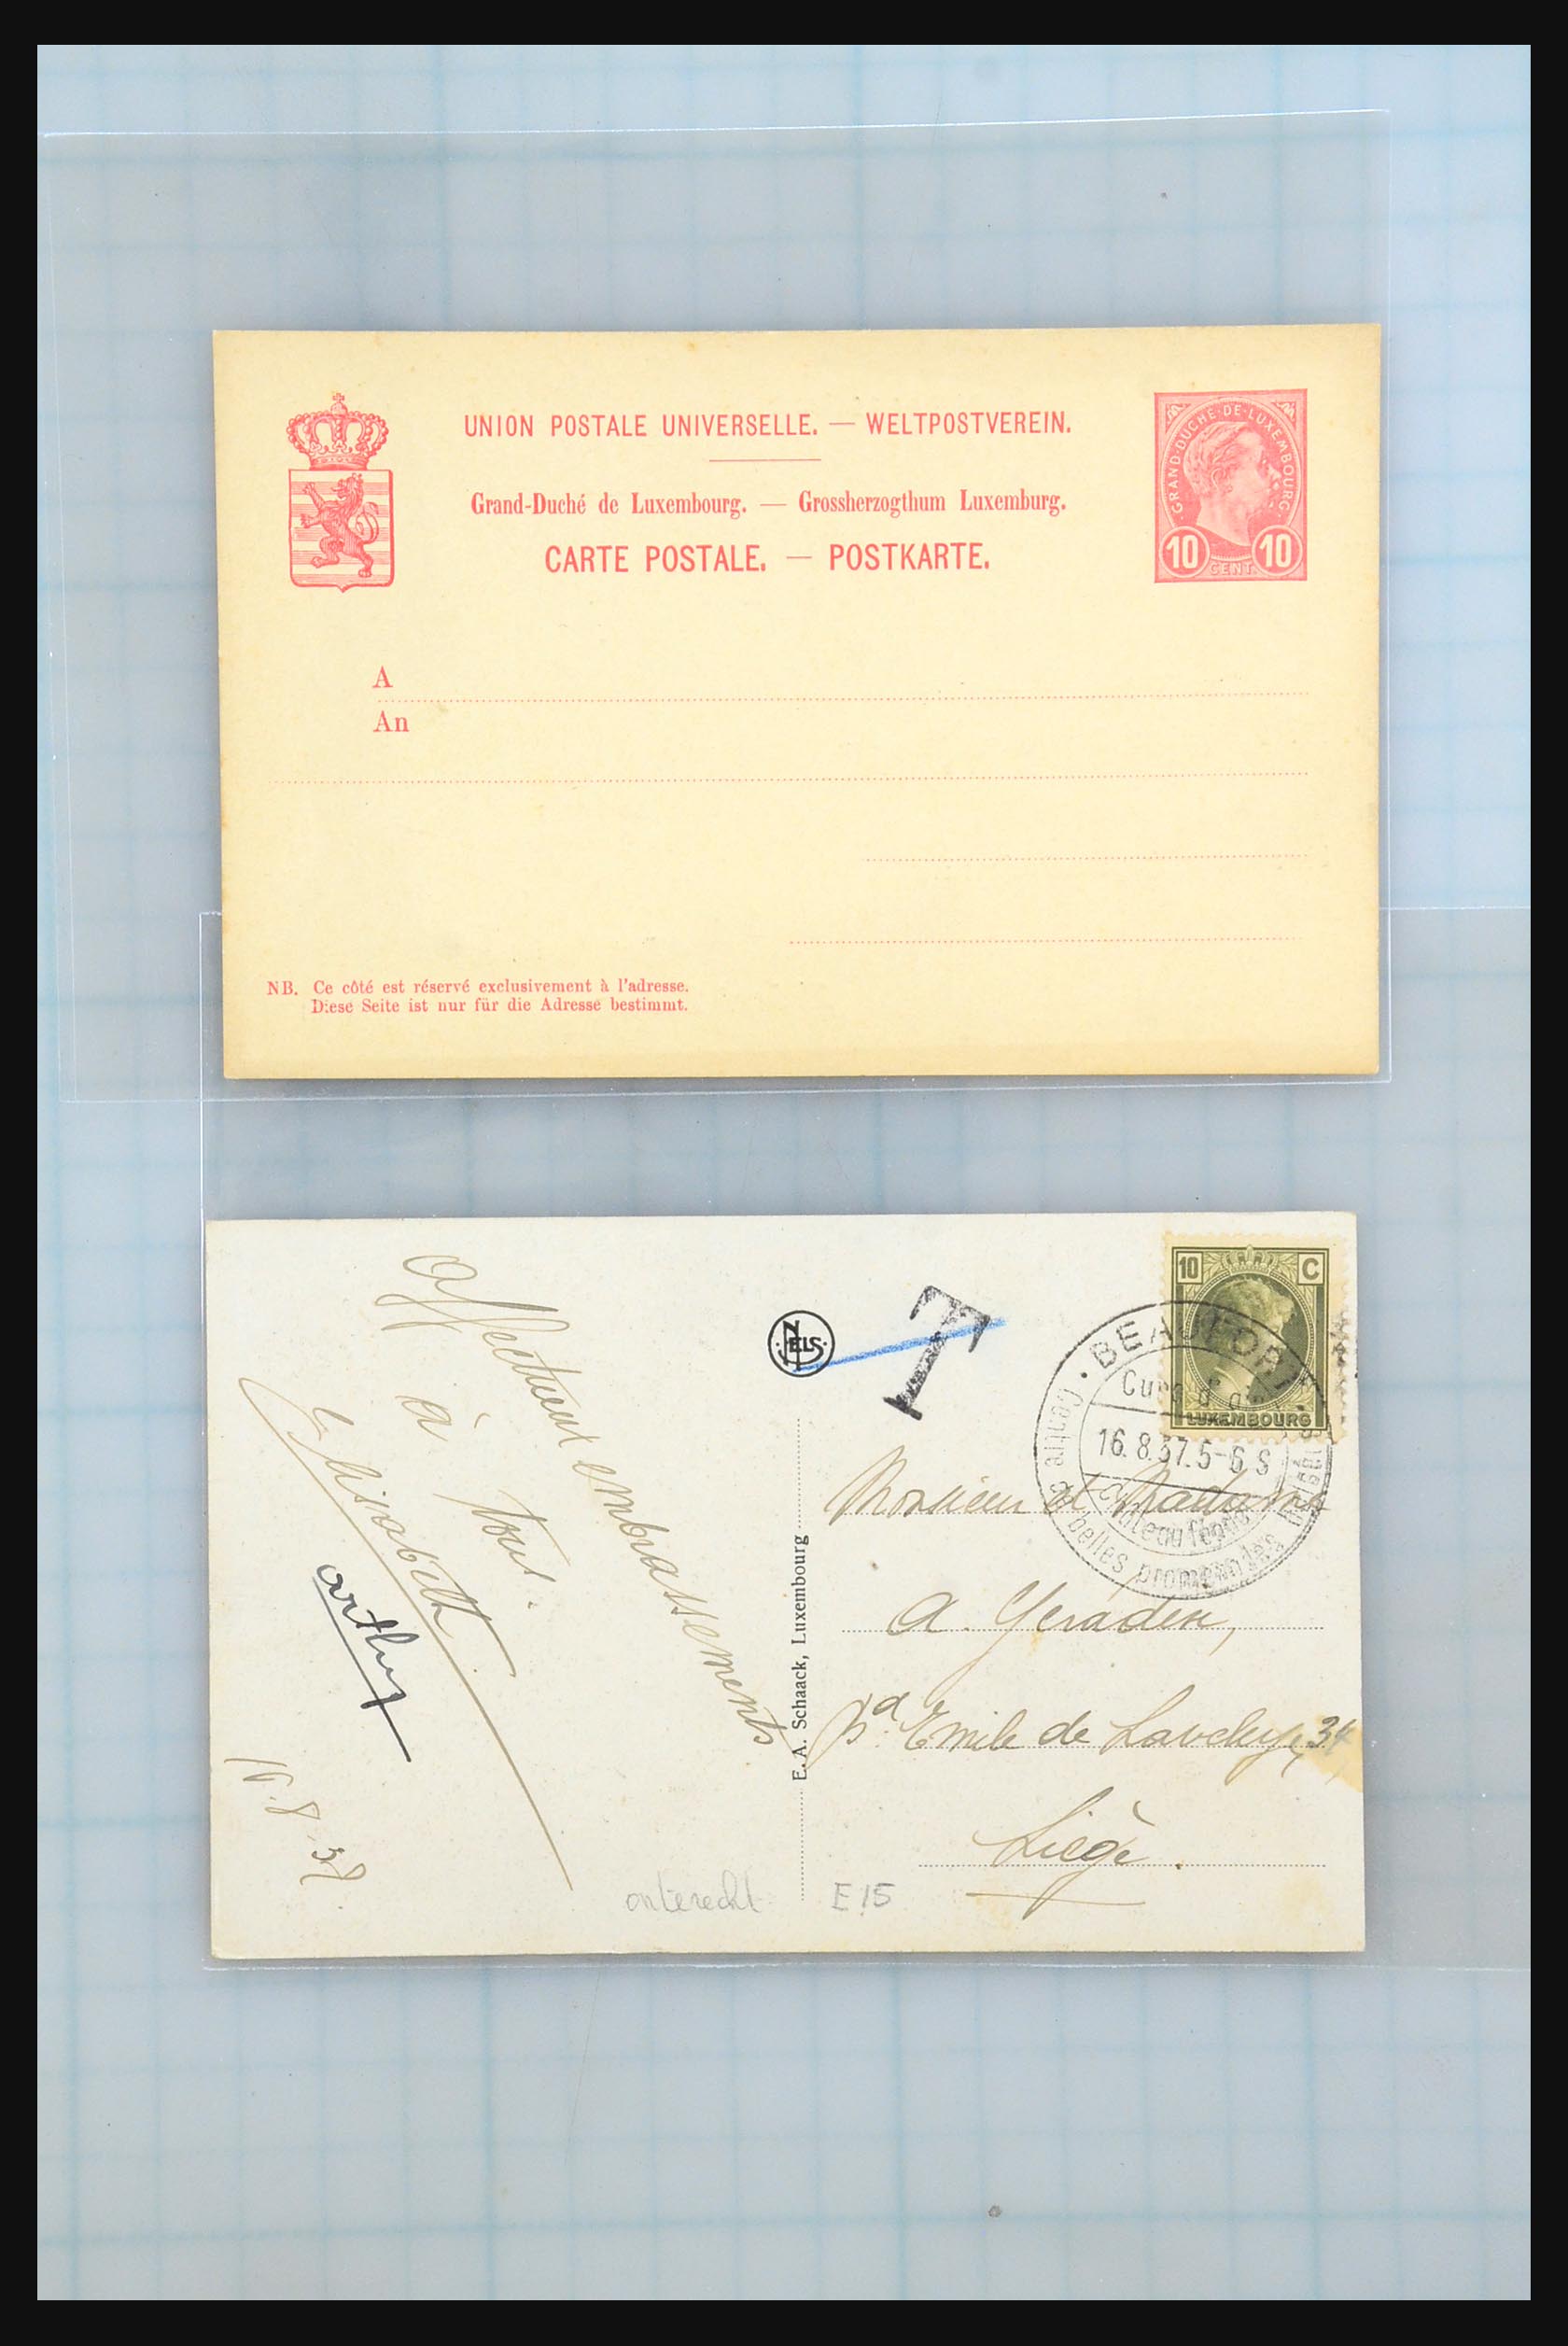 31358 069 - 31358 Portugal/Luxemburg/Greece covers 1880-1960.